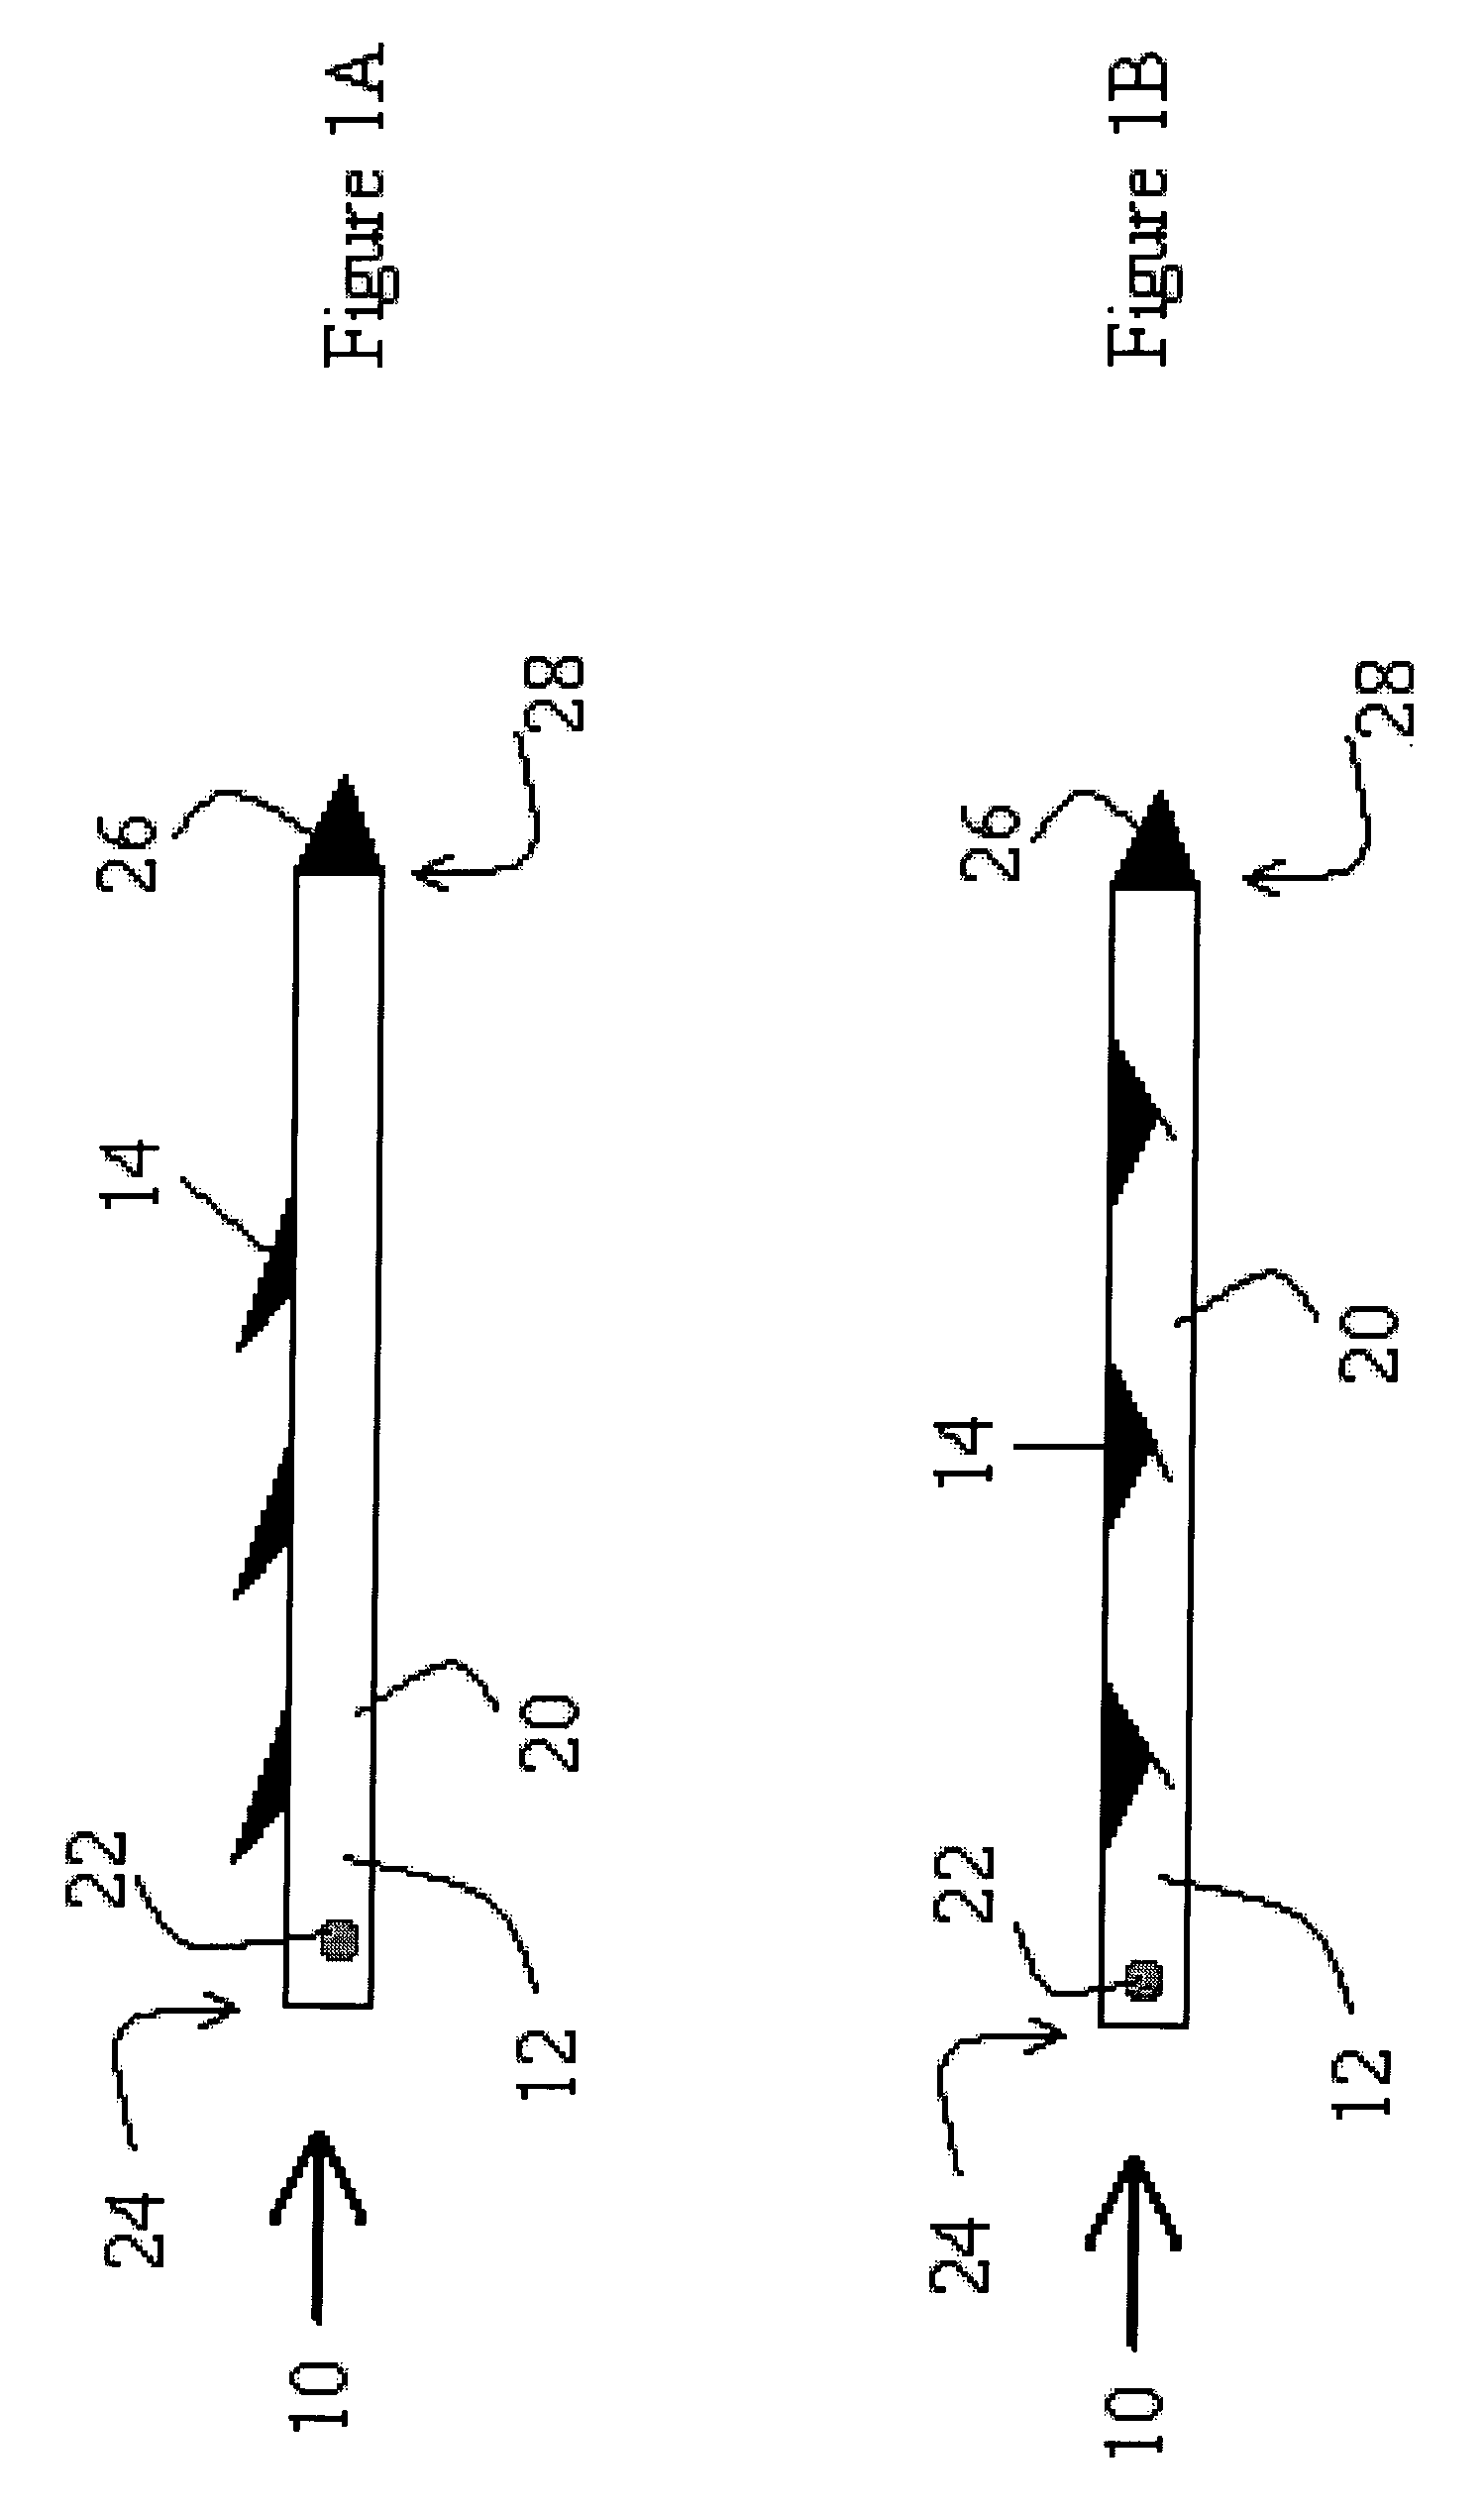 Device and Method for Treating Varicose Veins